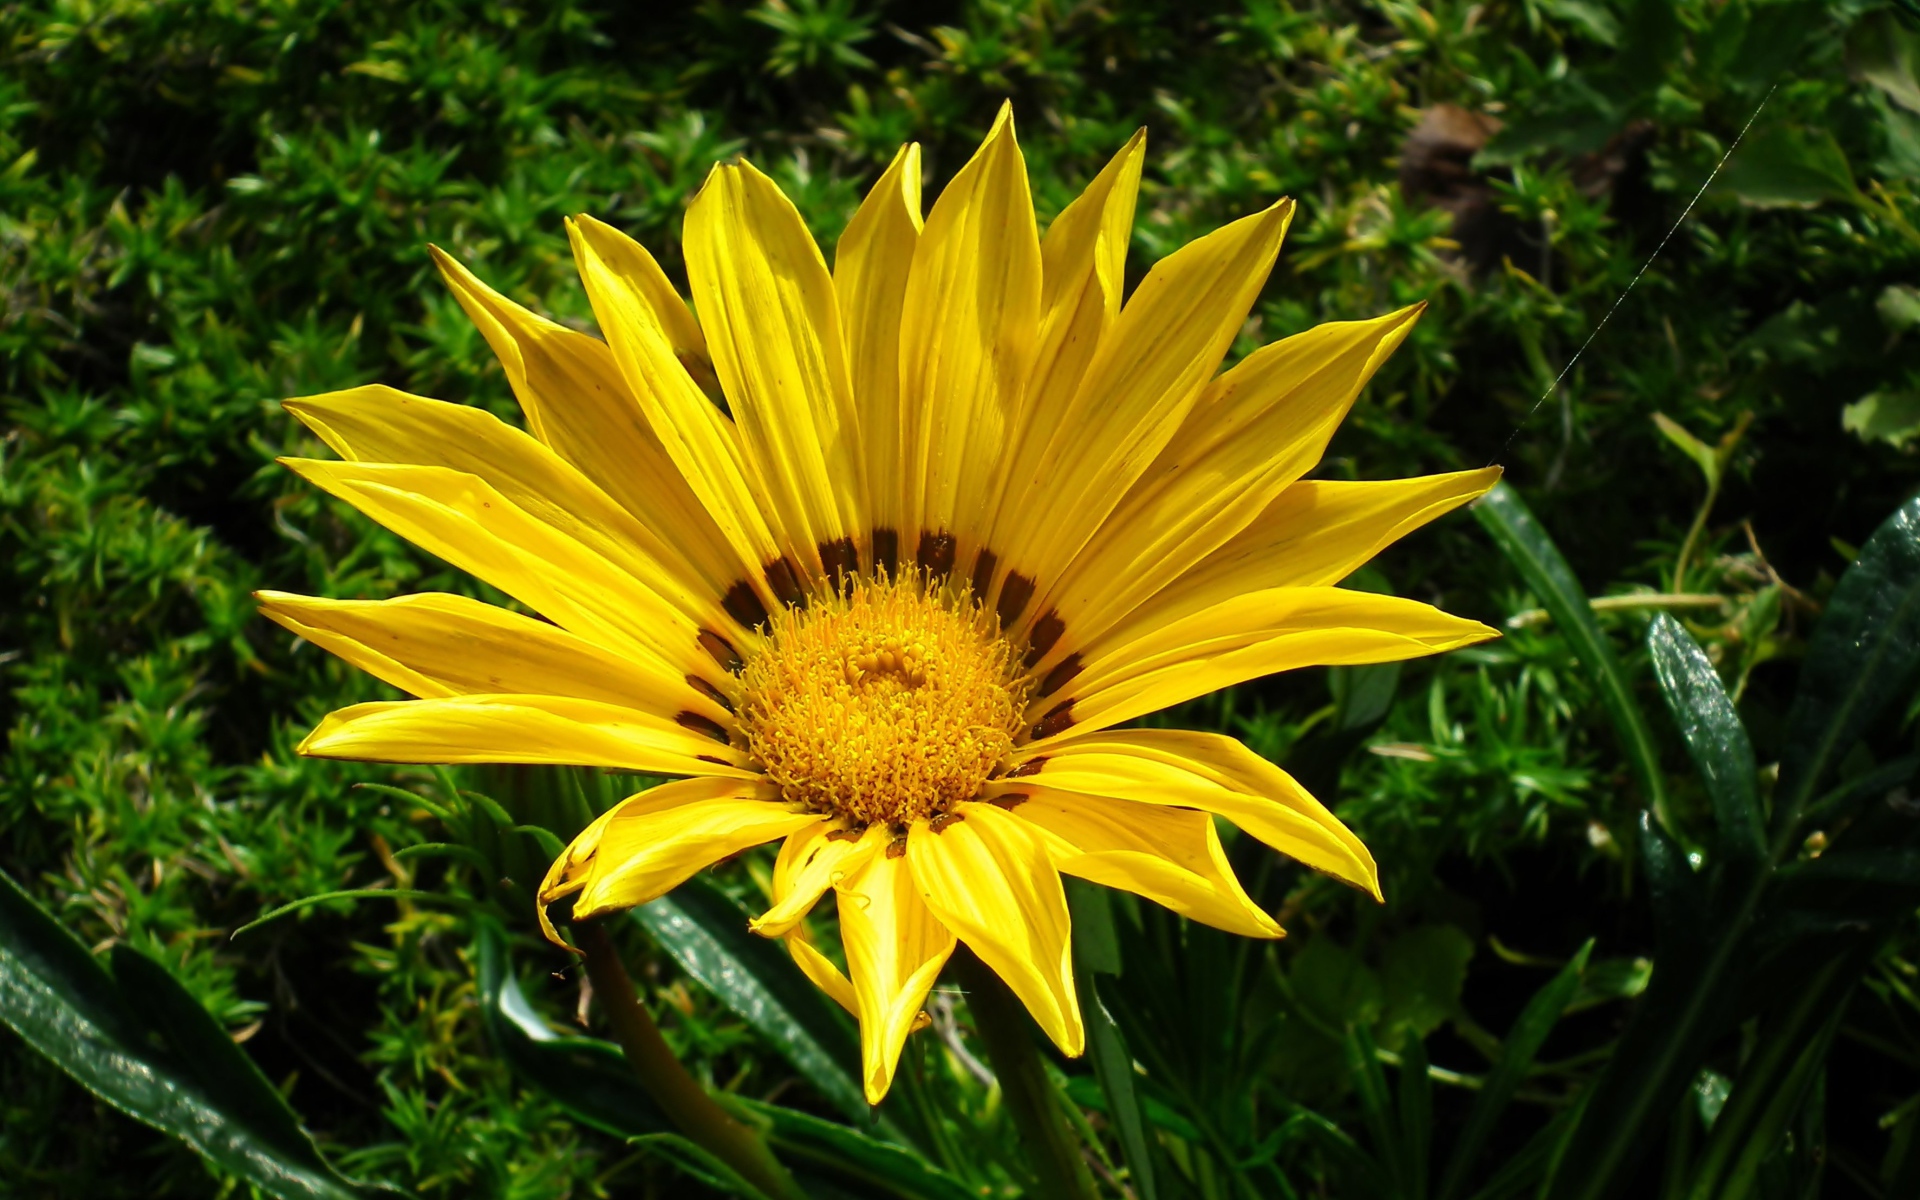 Large yellow gazania flower in a flower bed